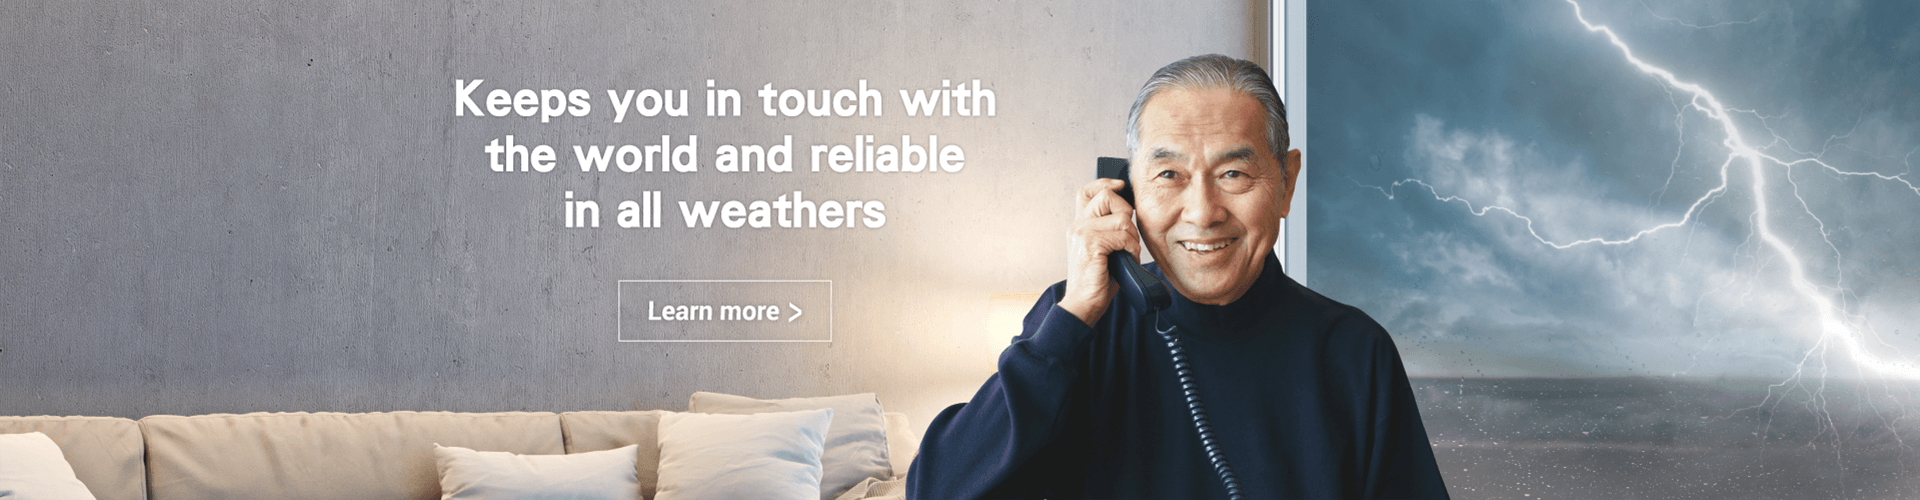 Keeps you in touch with the world and<br/>reliable in all weathers 